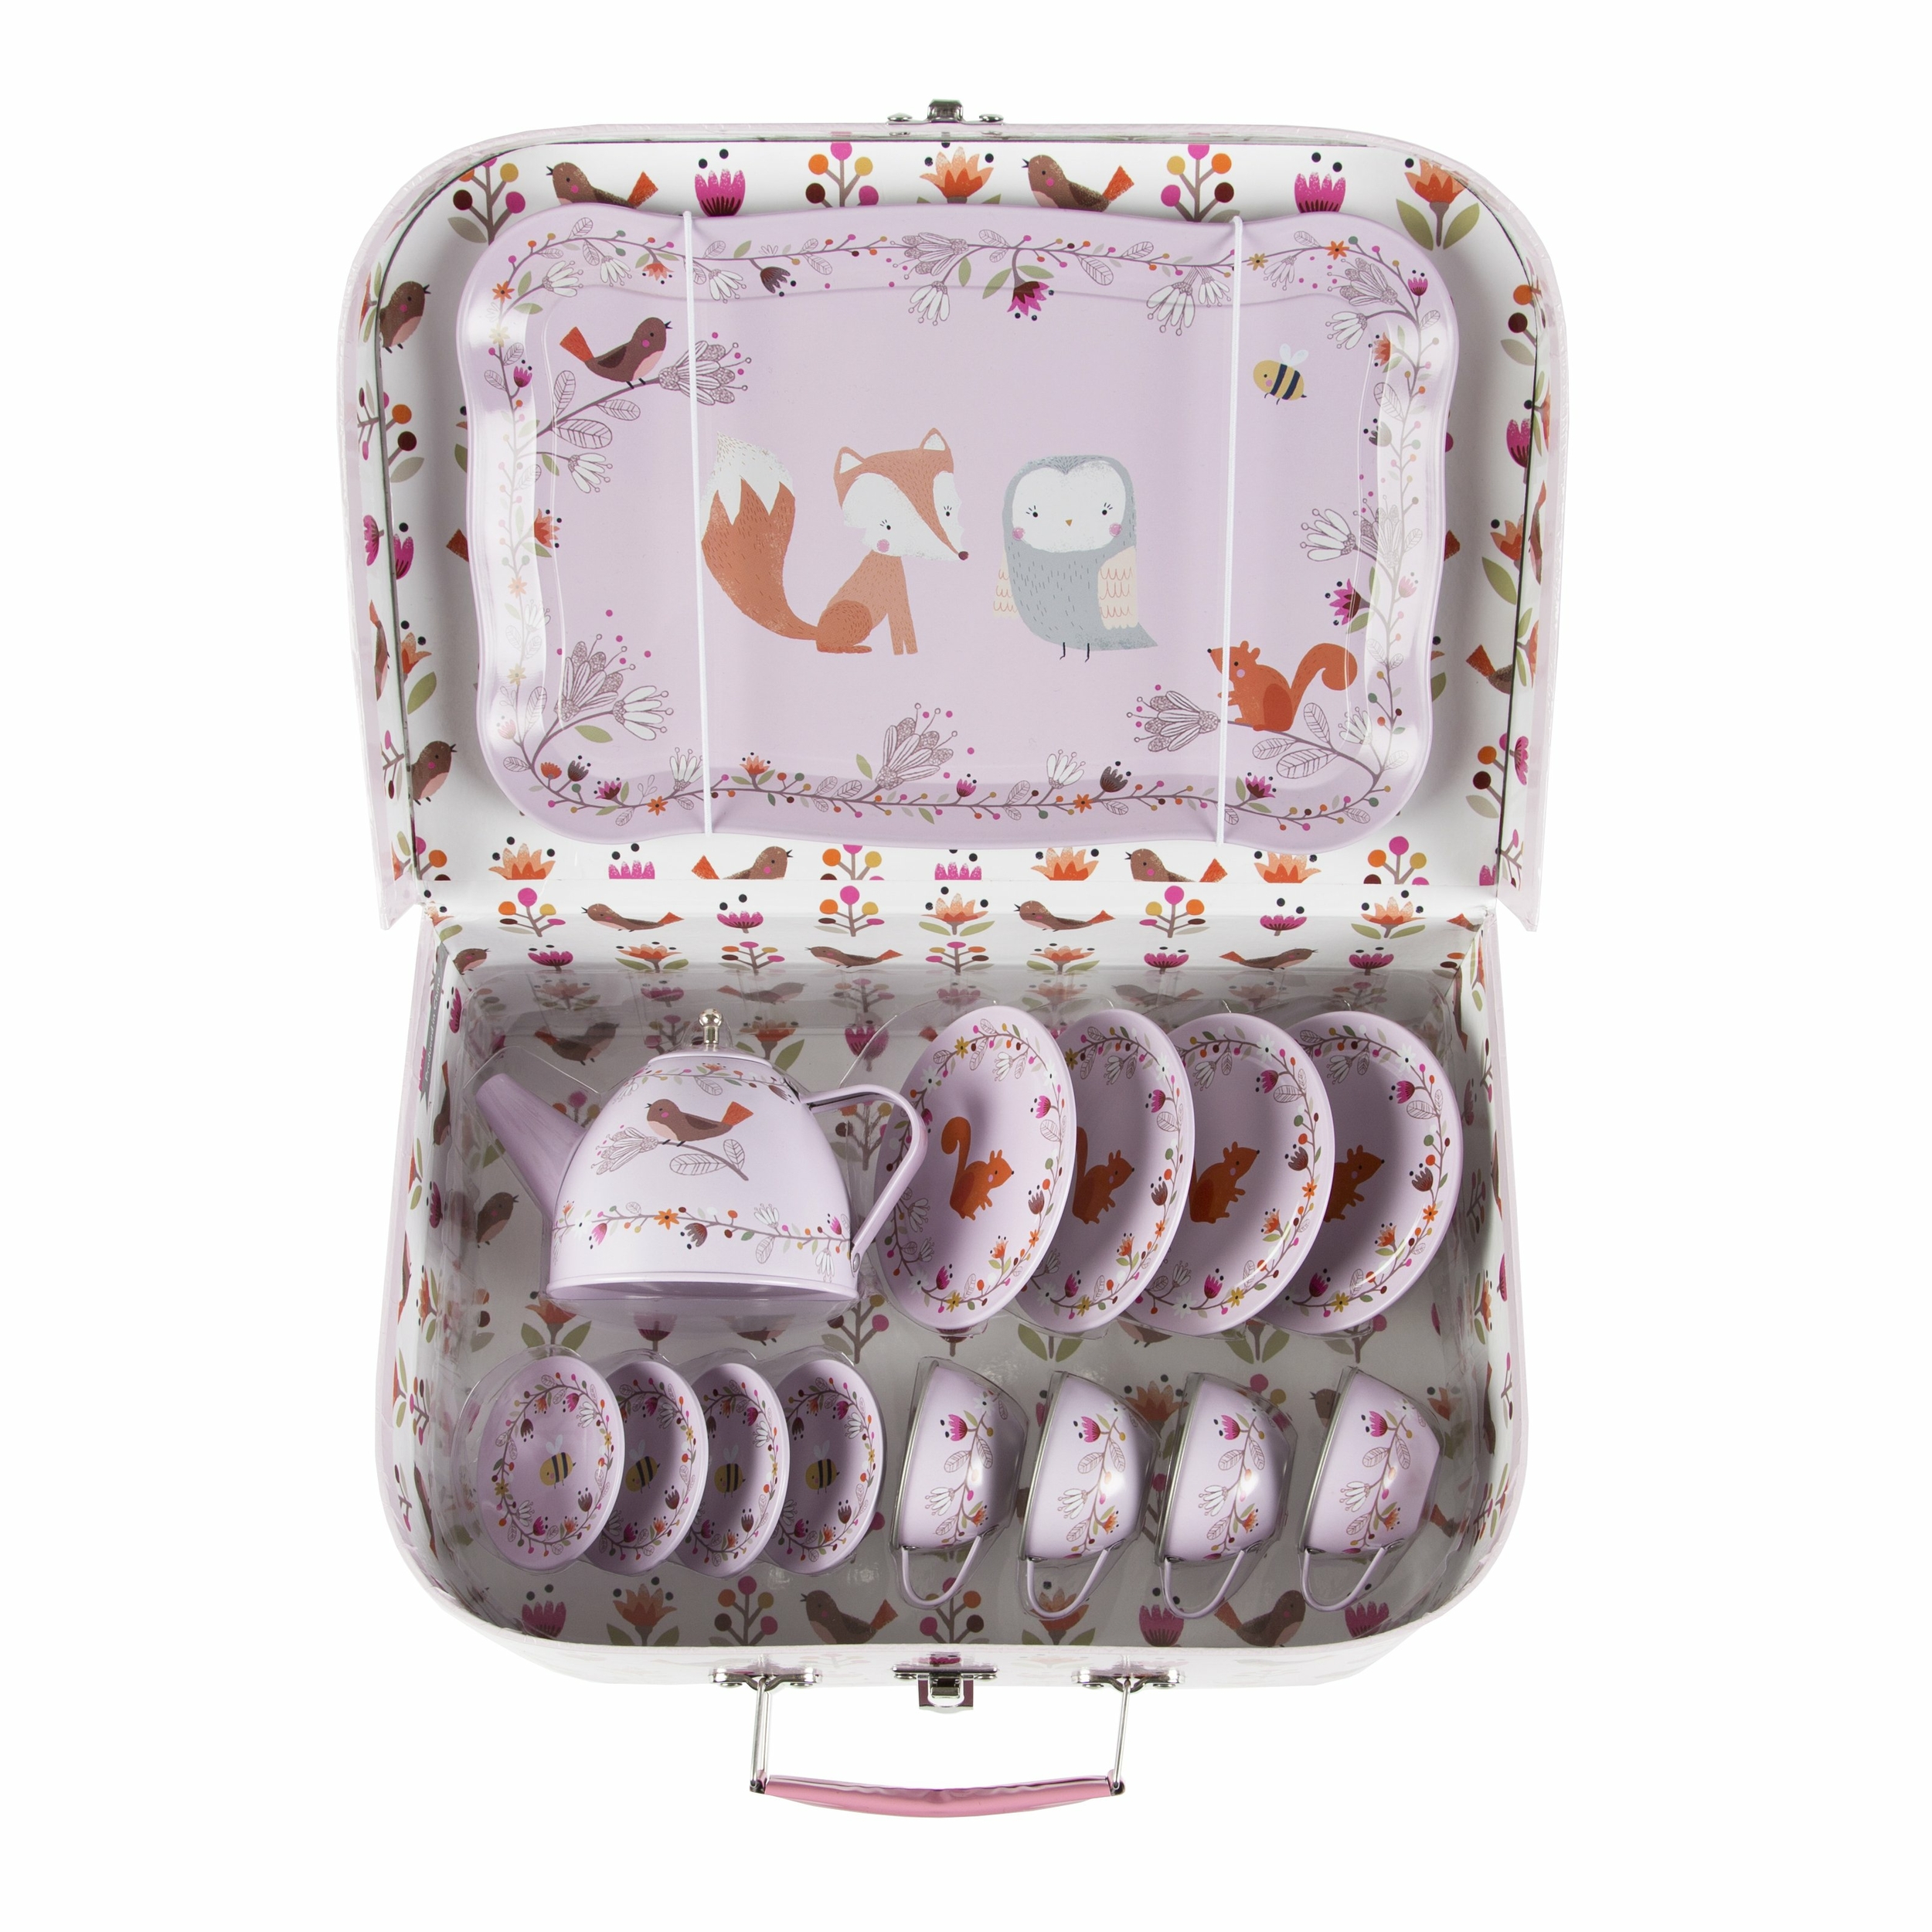 MA VALISE DINETTE A THE WOODLAND FRIENDS